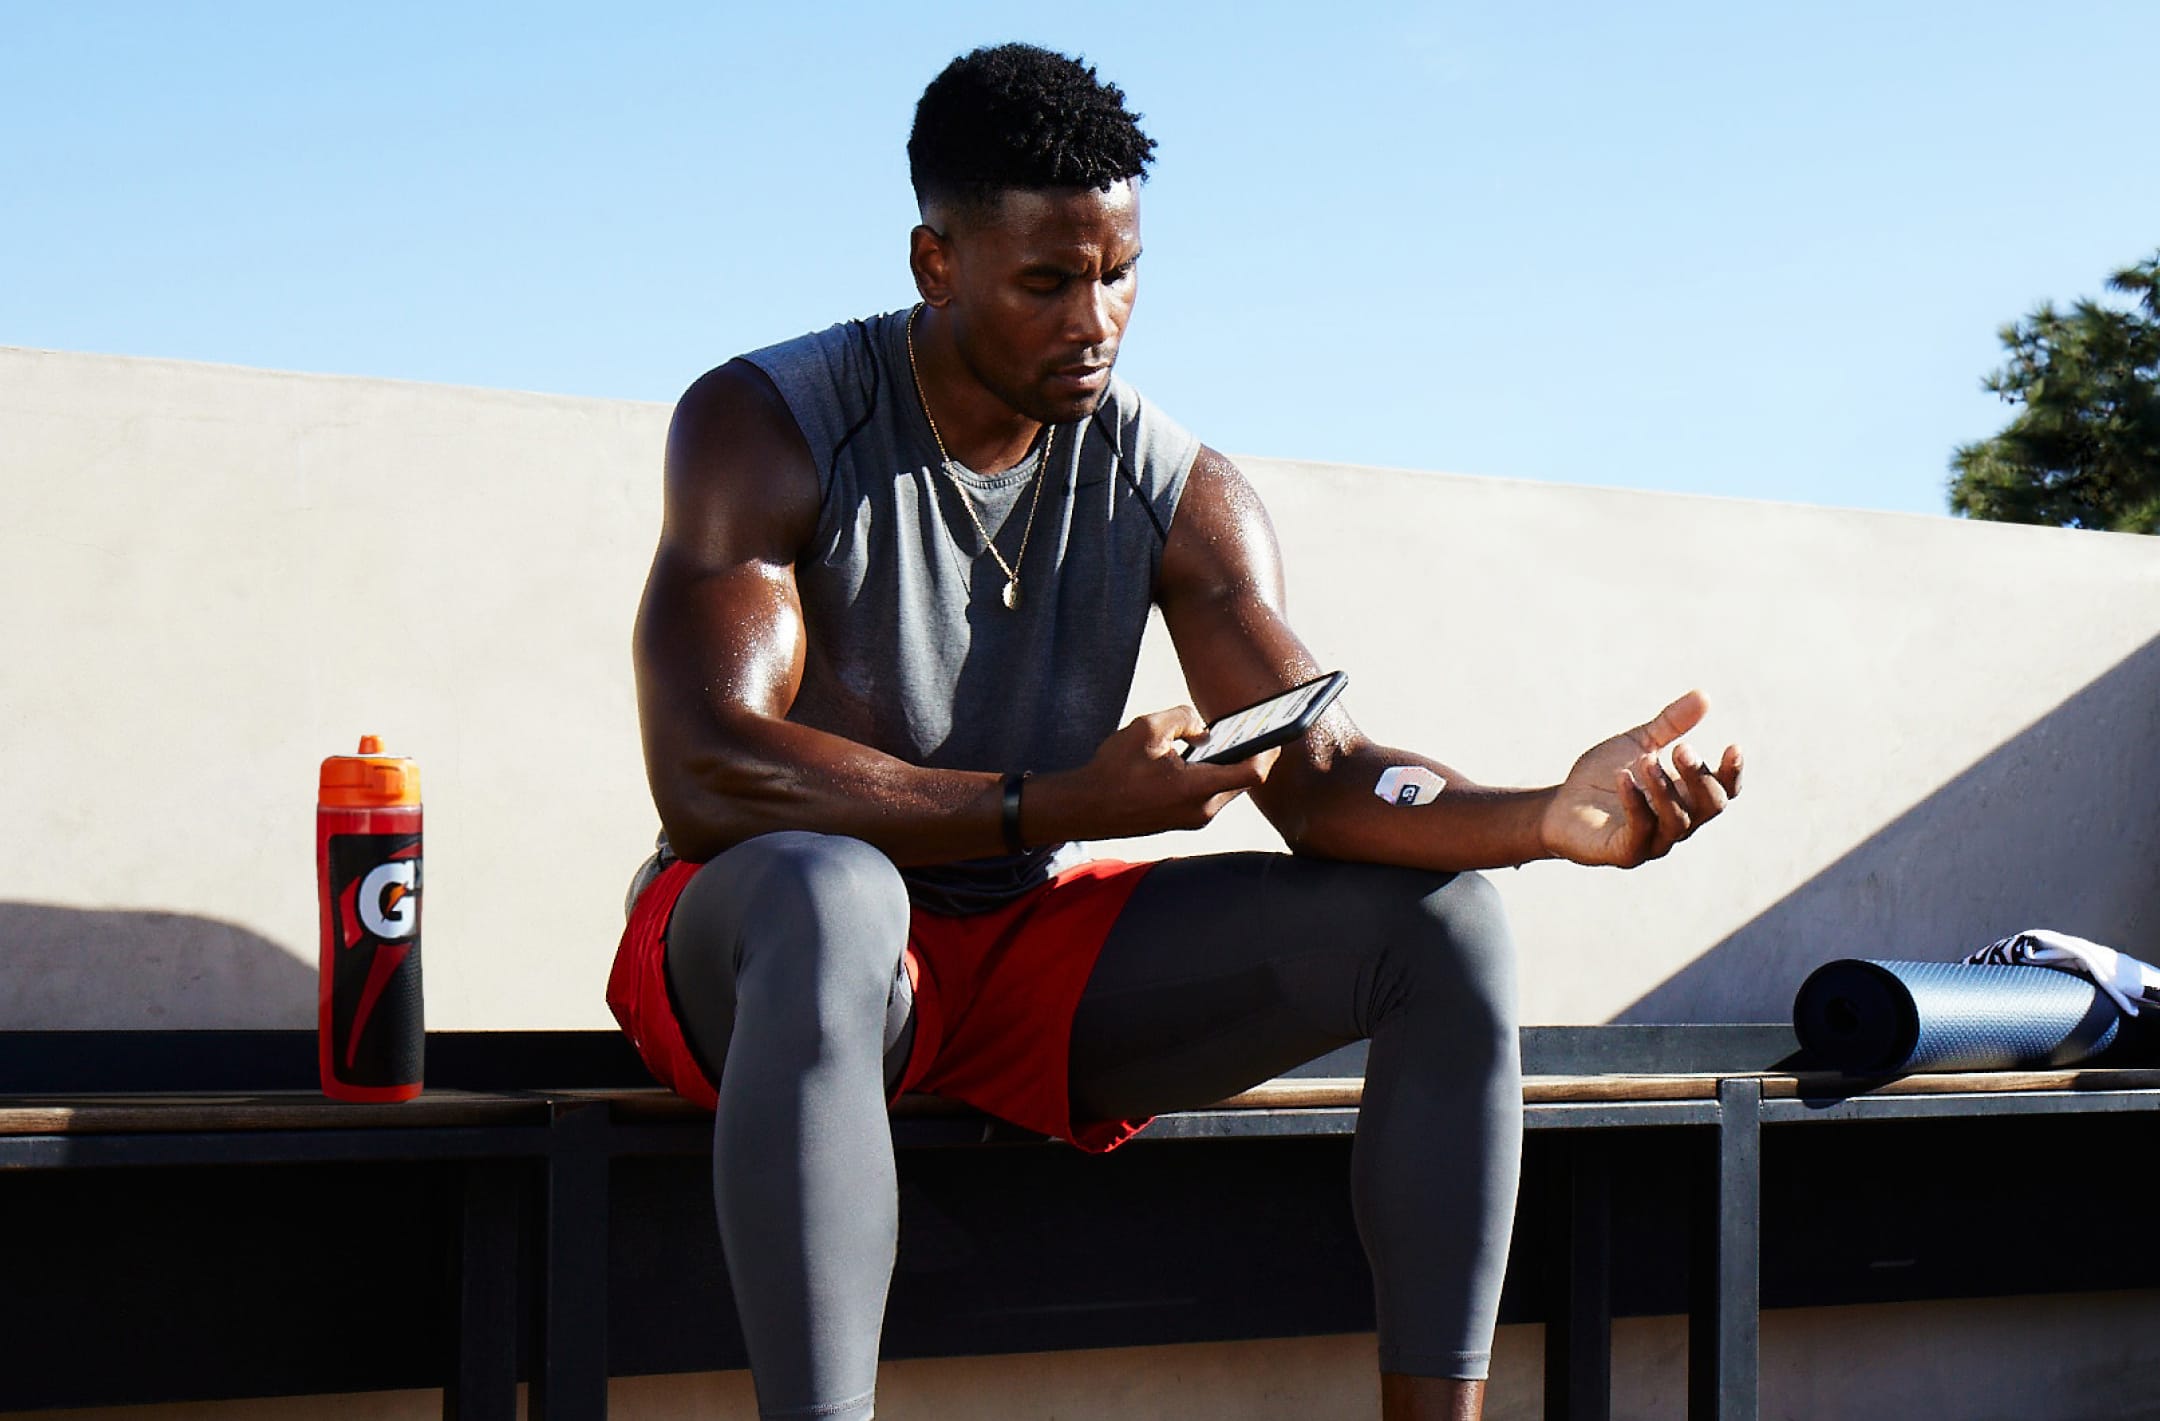 Gatorade launches Gx Sweat Patch that measures sweat, hydration levels